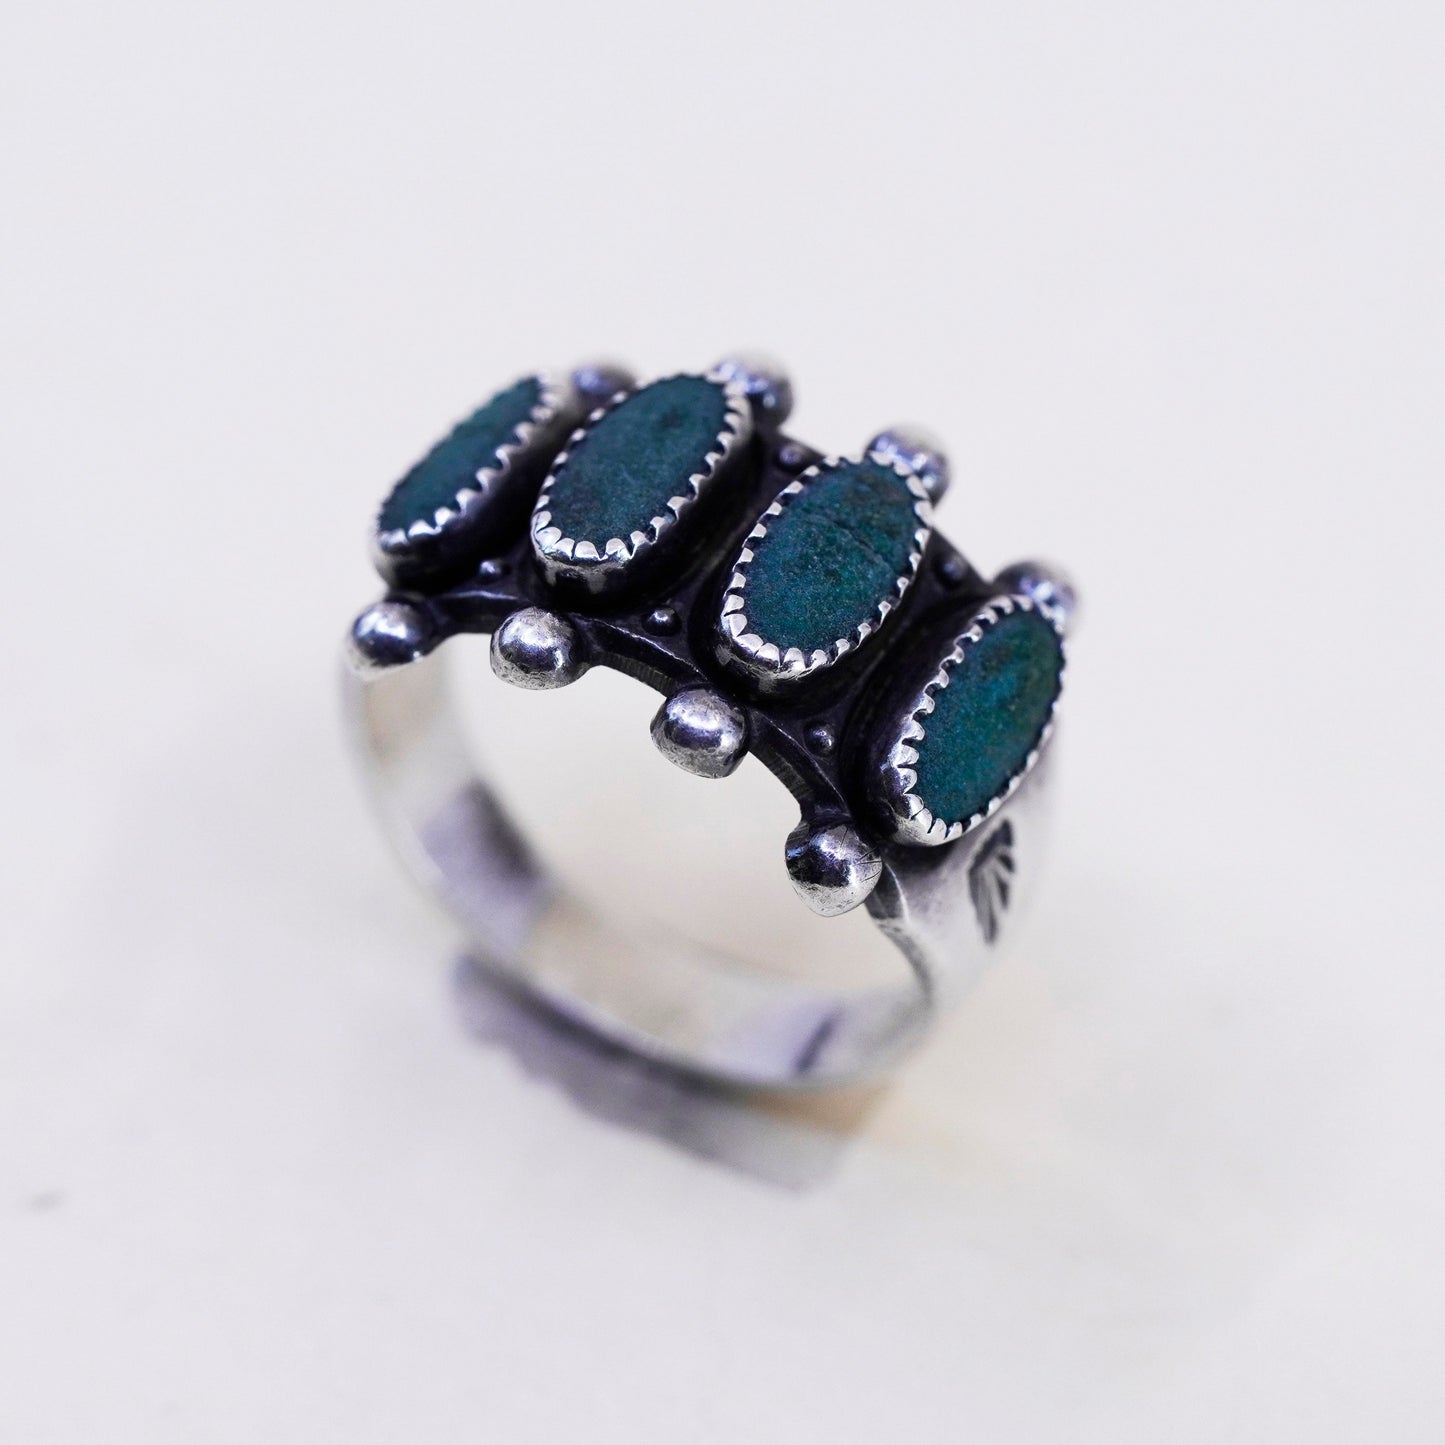 Size 5, vtg sterling silver Native American 925 band ring oval turquoise beads